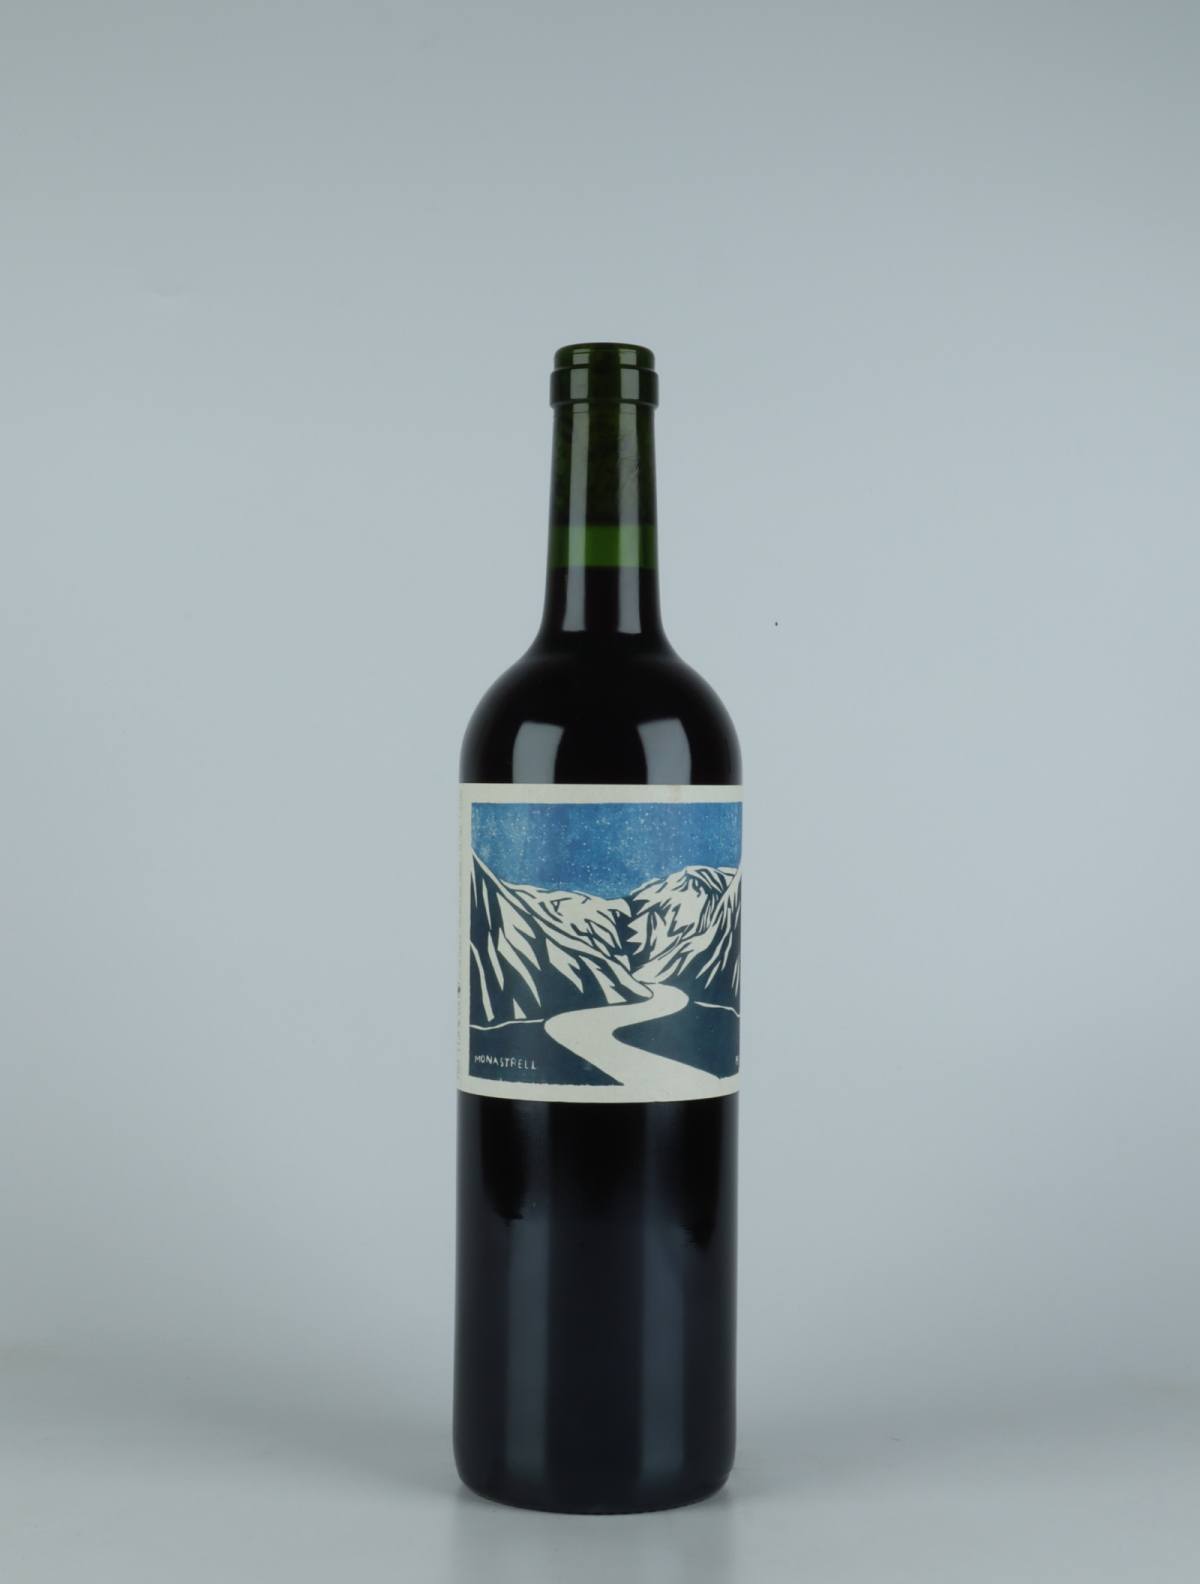 A bottle 2021 Transhumància Monastrell Red wine from Domaine Cotzé, Pyrenees in France